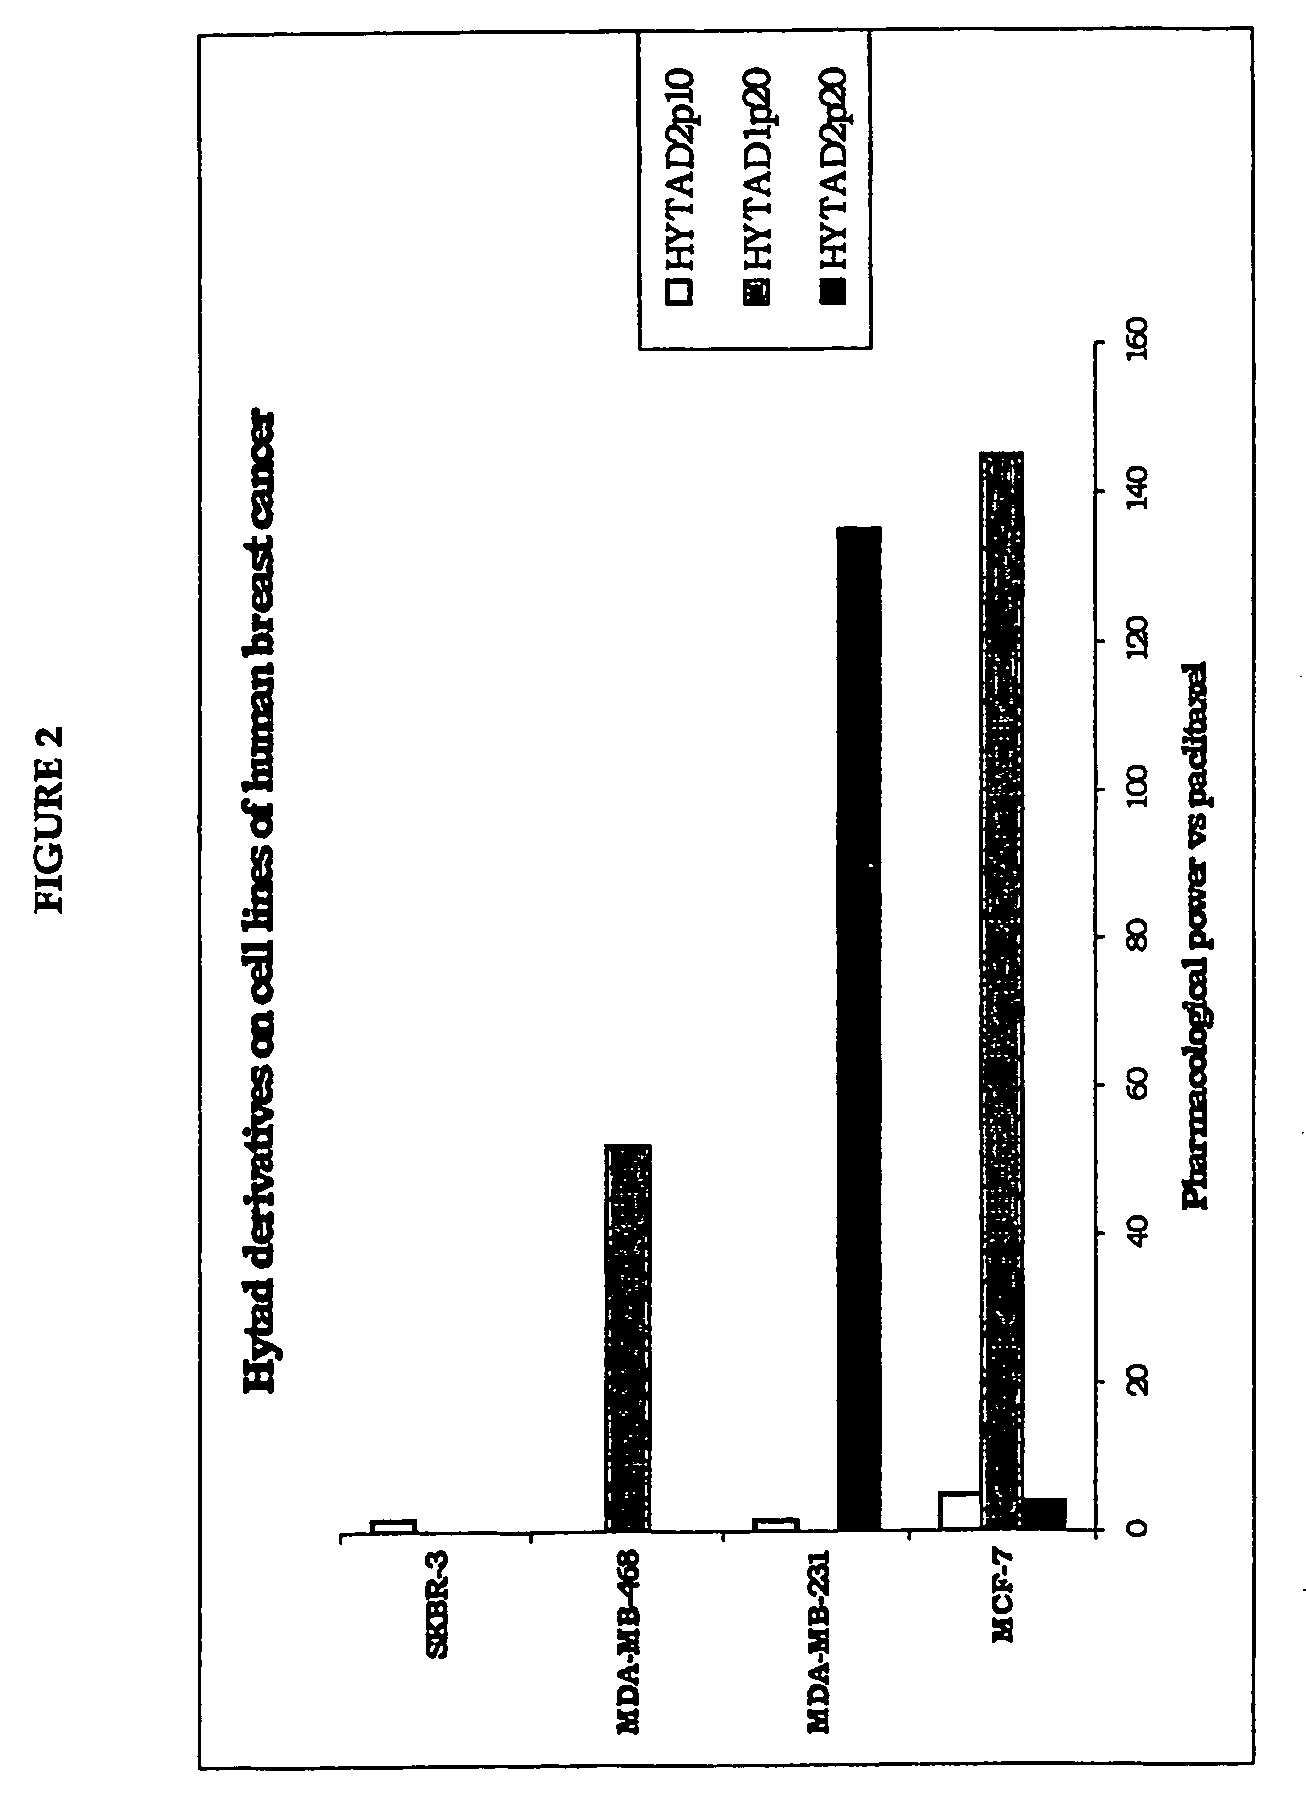 Taxanes covalently bounded to hyaluronic acid or hyaluronic acid derivatives